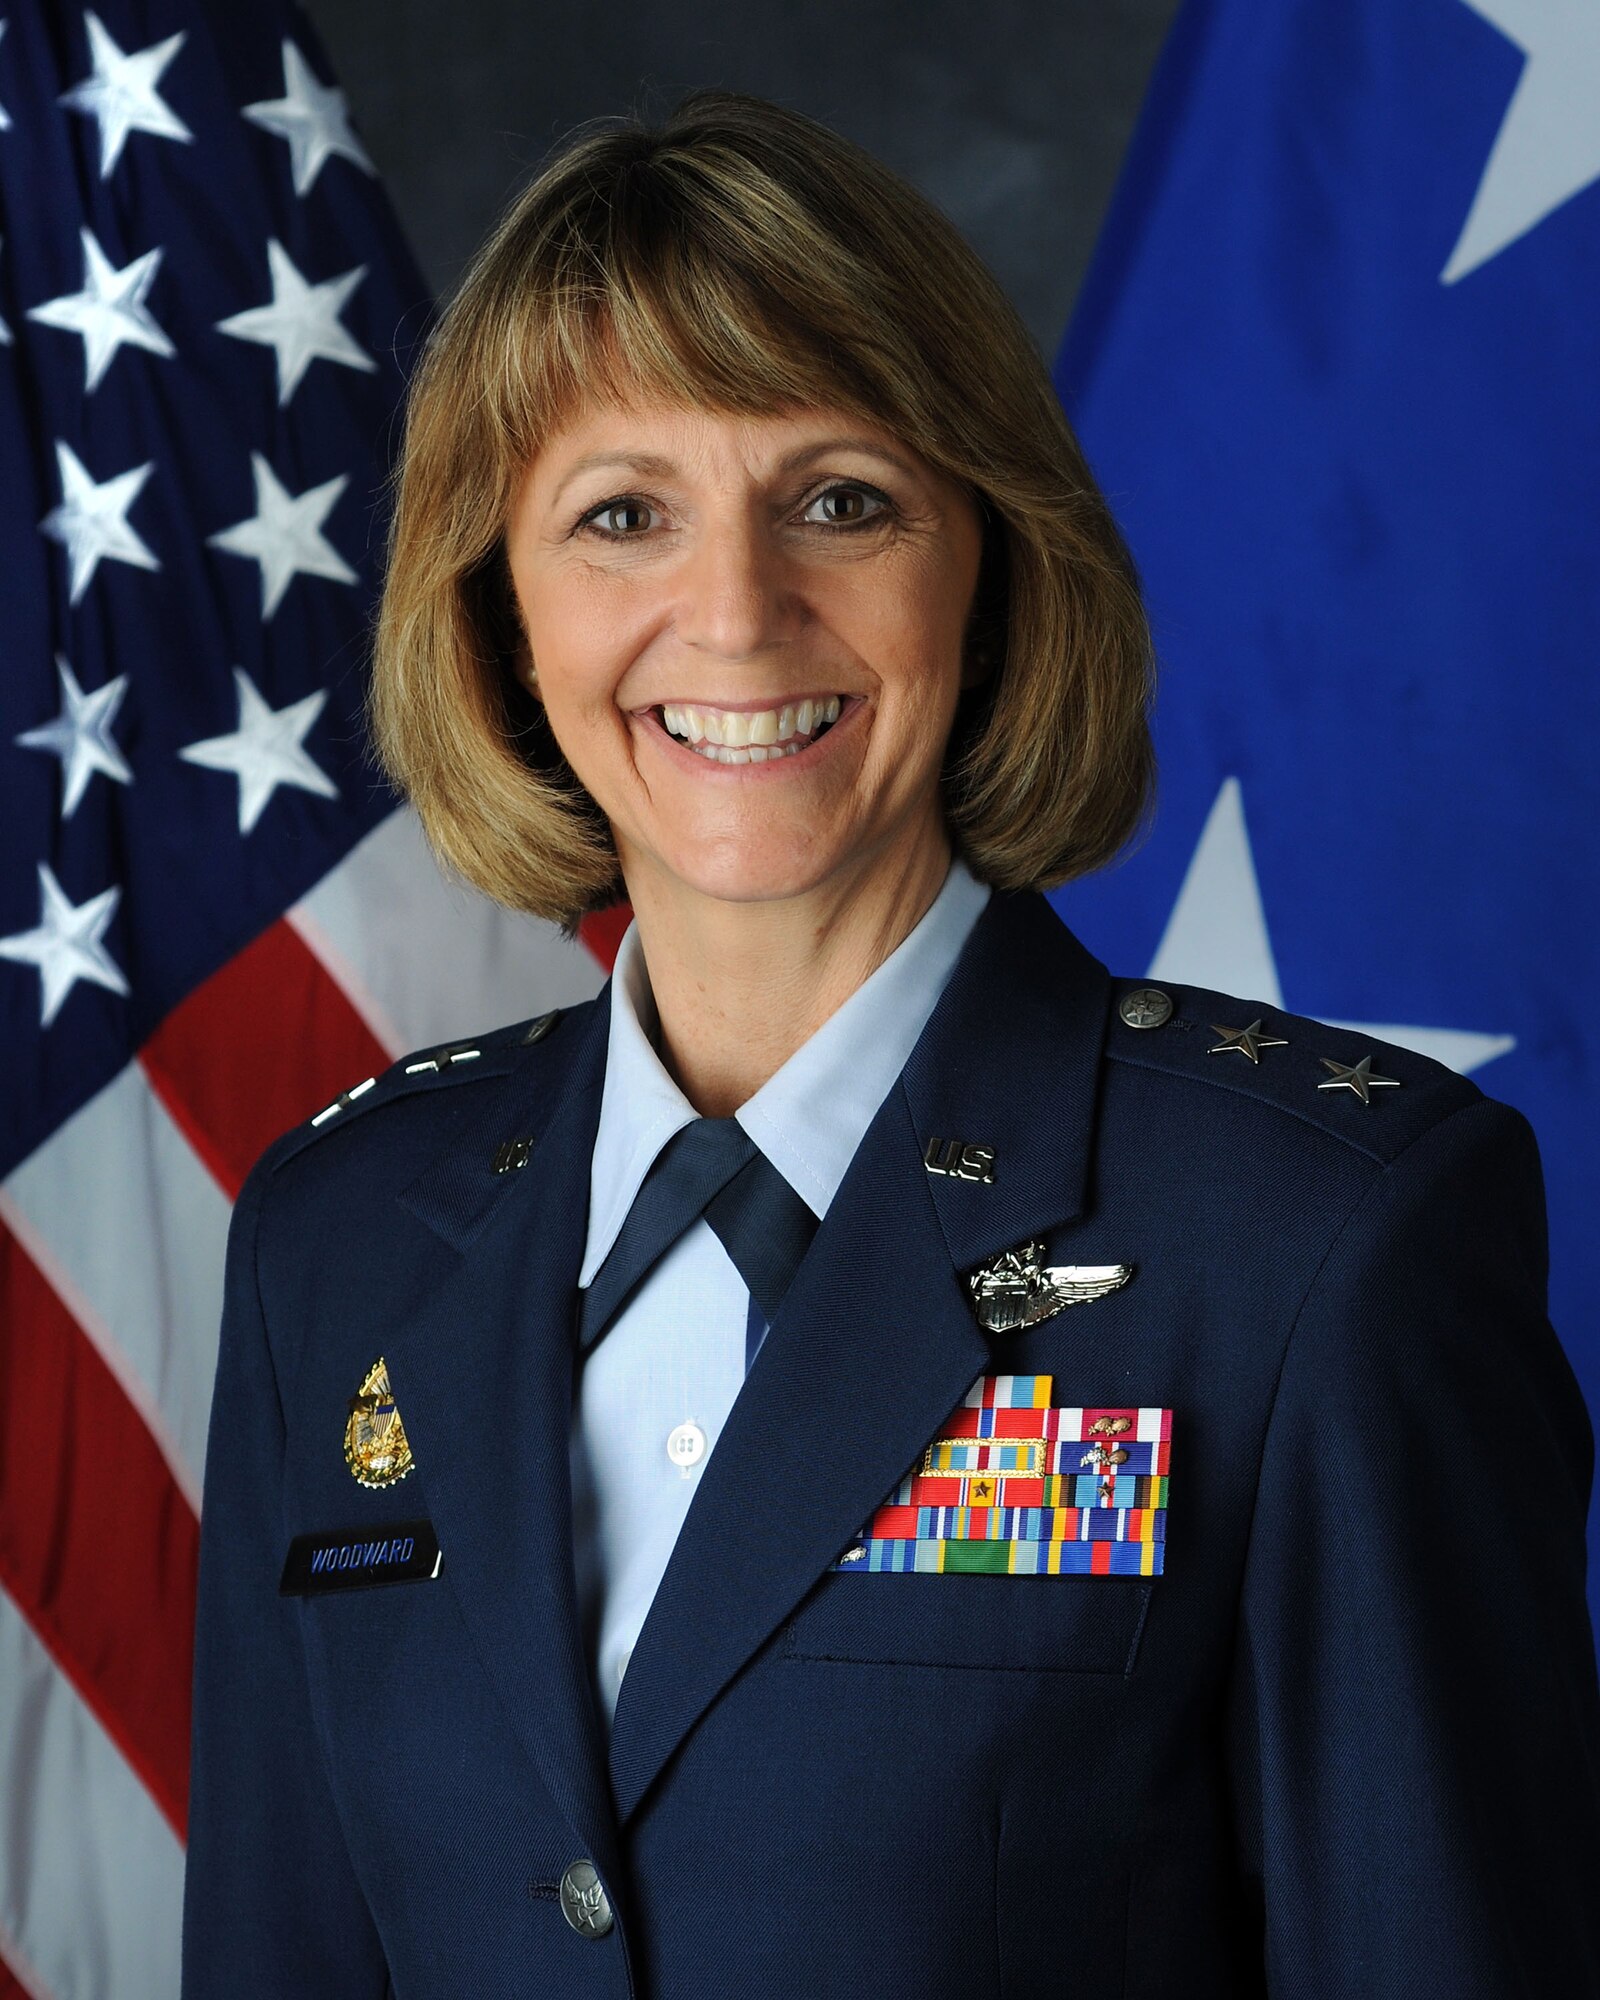 aj. Gen. Margaret Woodward has been taking time from her whirlwind schedule lately to reflect on the achievements of her unit and her time at Ramstein. With the pending inactivation of the 17th Air Force (Air Forces Africa) April 20, the general has kept up the command’s obligations as the air component for U.S. Africa Command, visiting Ghana, Djibouti and Morocco in the last 30 days. She has also been taking time to eflect and recognize the contributions of AFAFRICA since its 2008 stand up. (Courtesy photo)